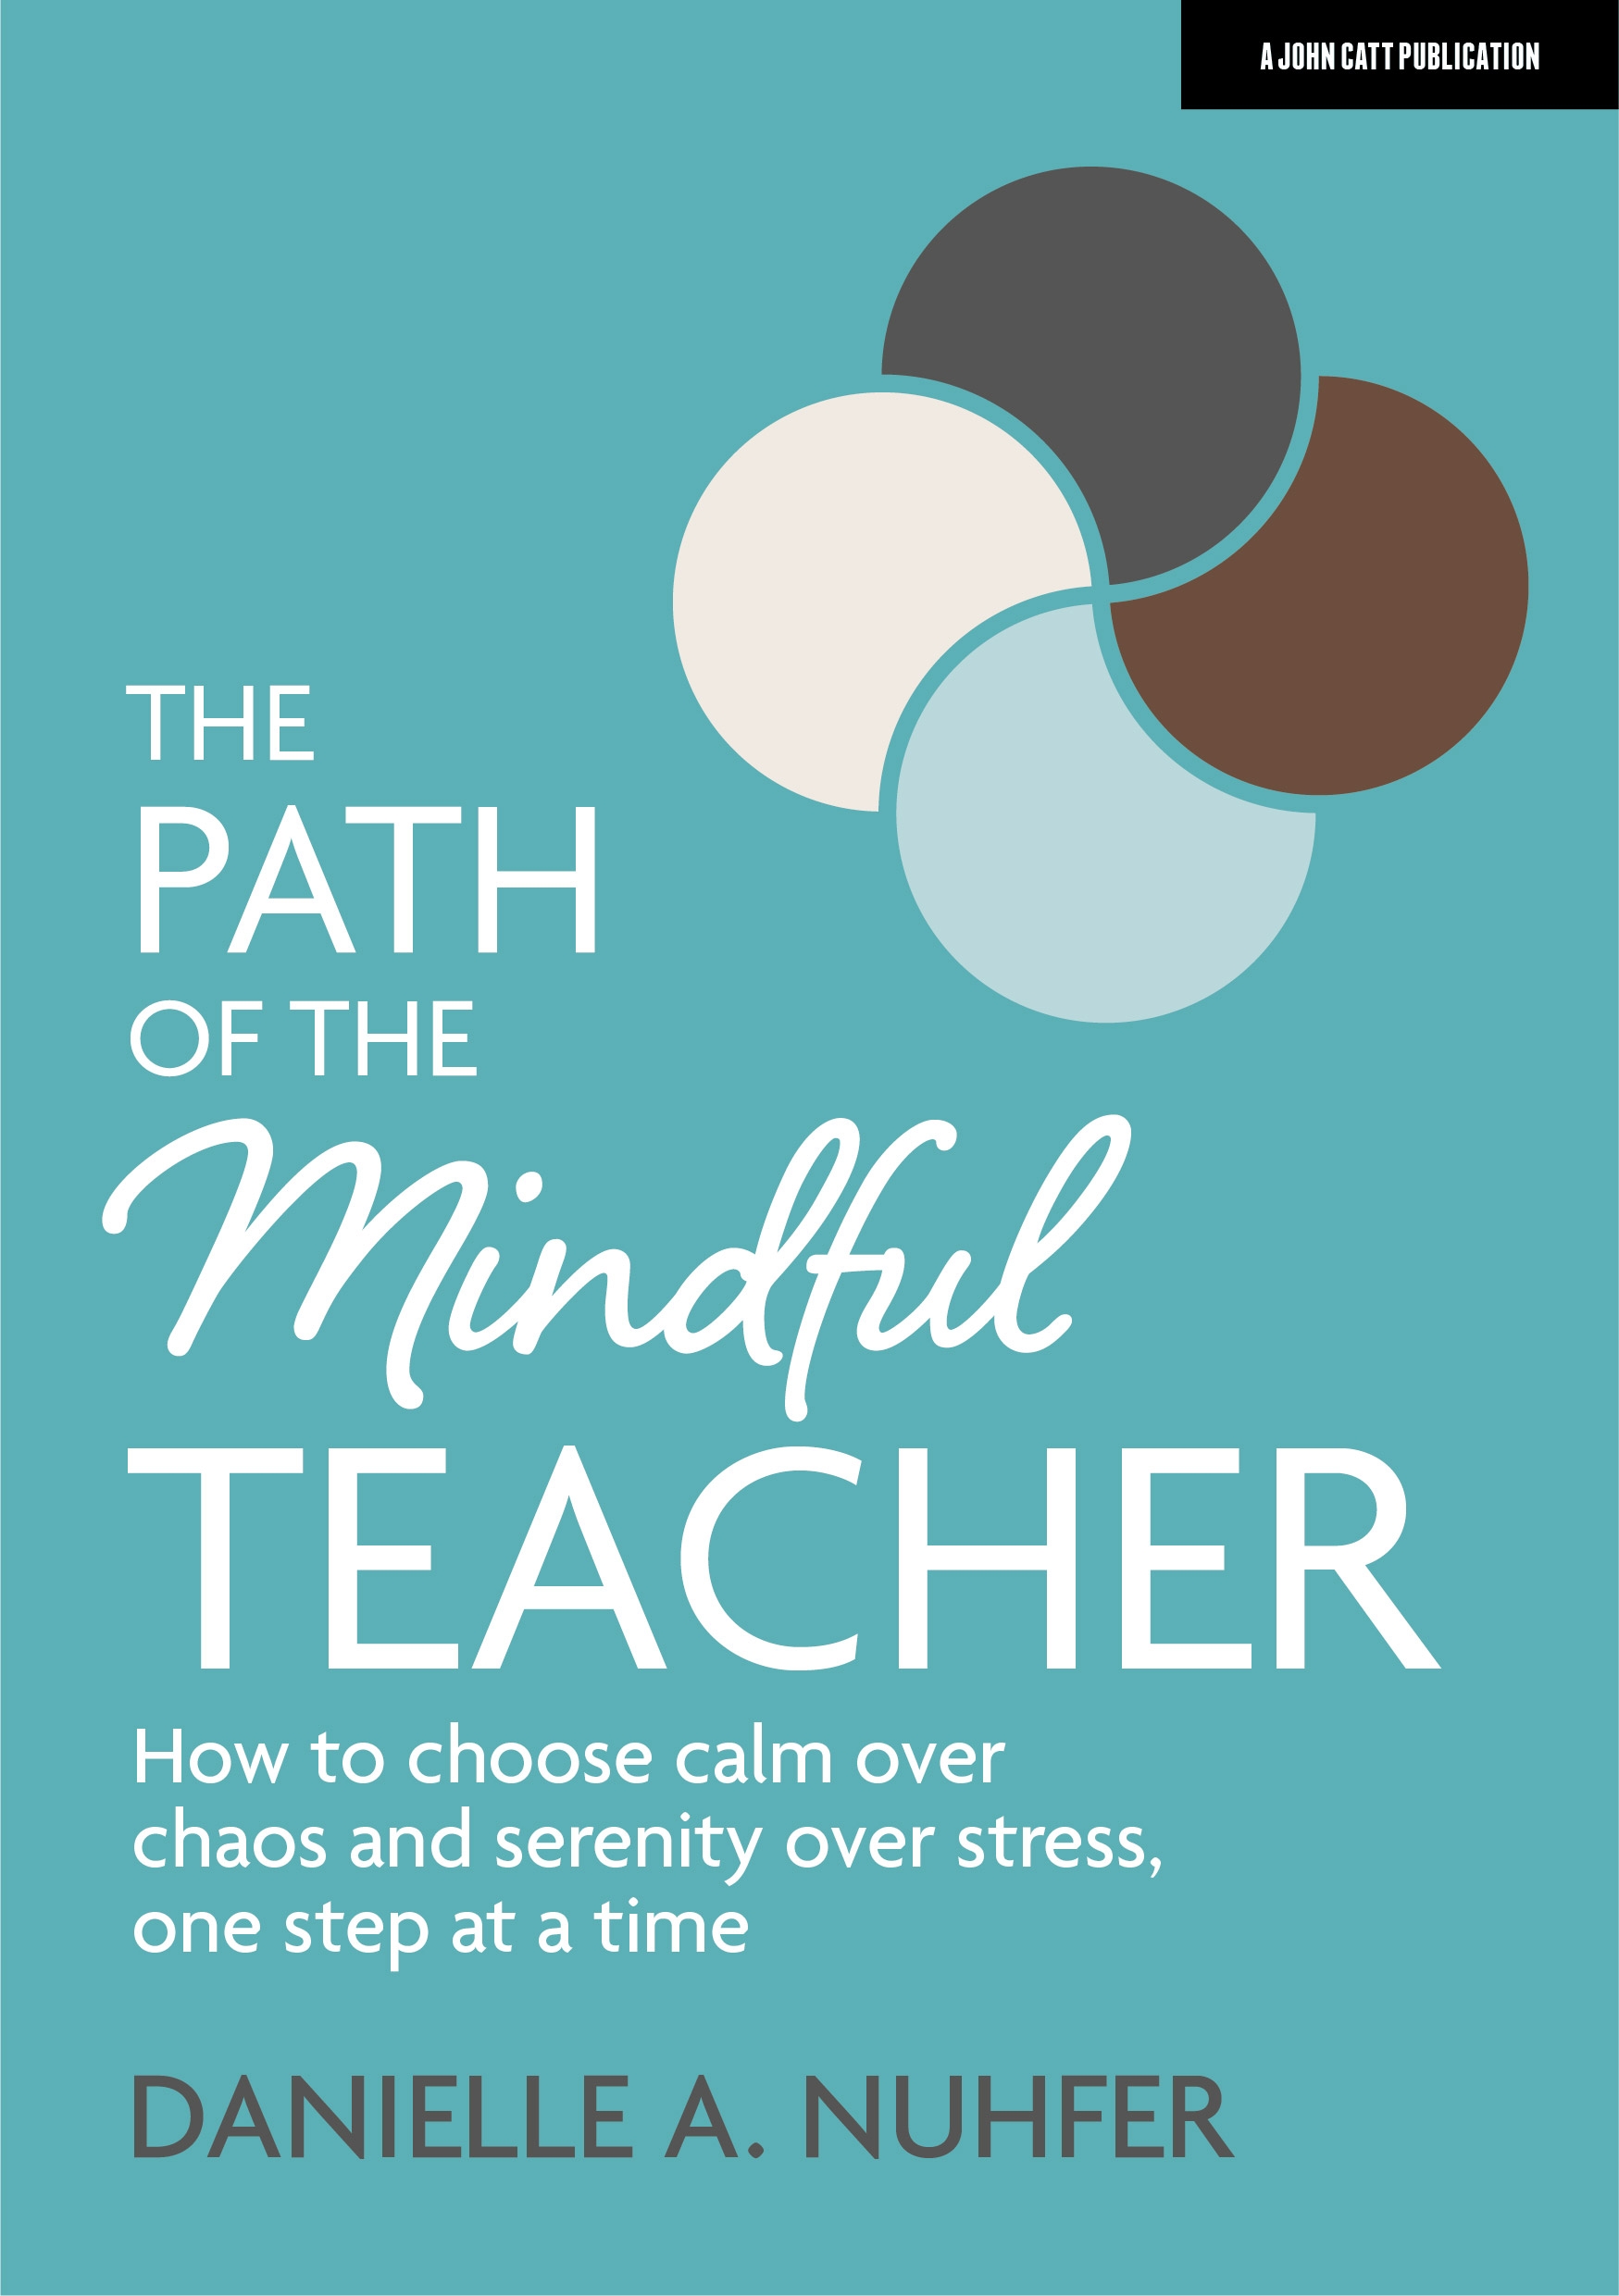 Featured image for “The Path of The Mindful Teacher: How to choose calm over chaos and serenity over stress, one step at a time”